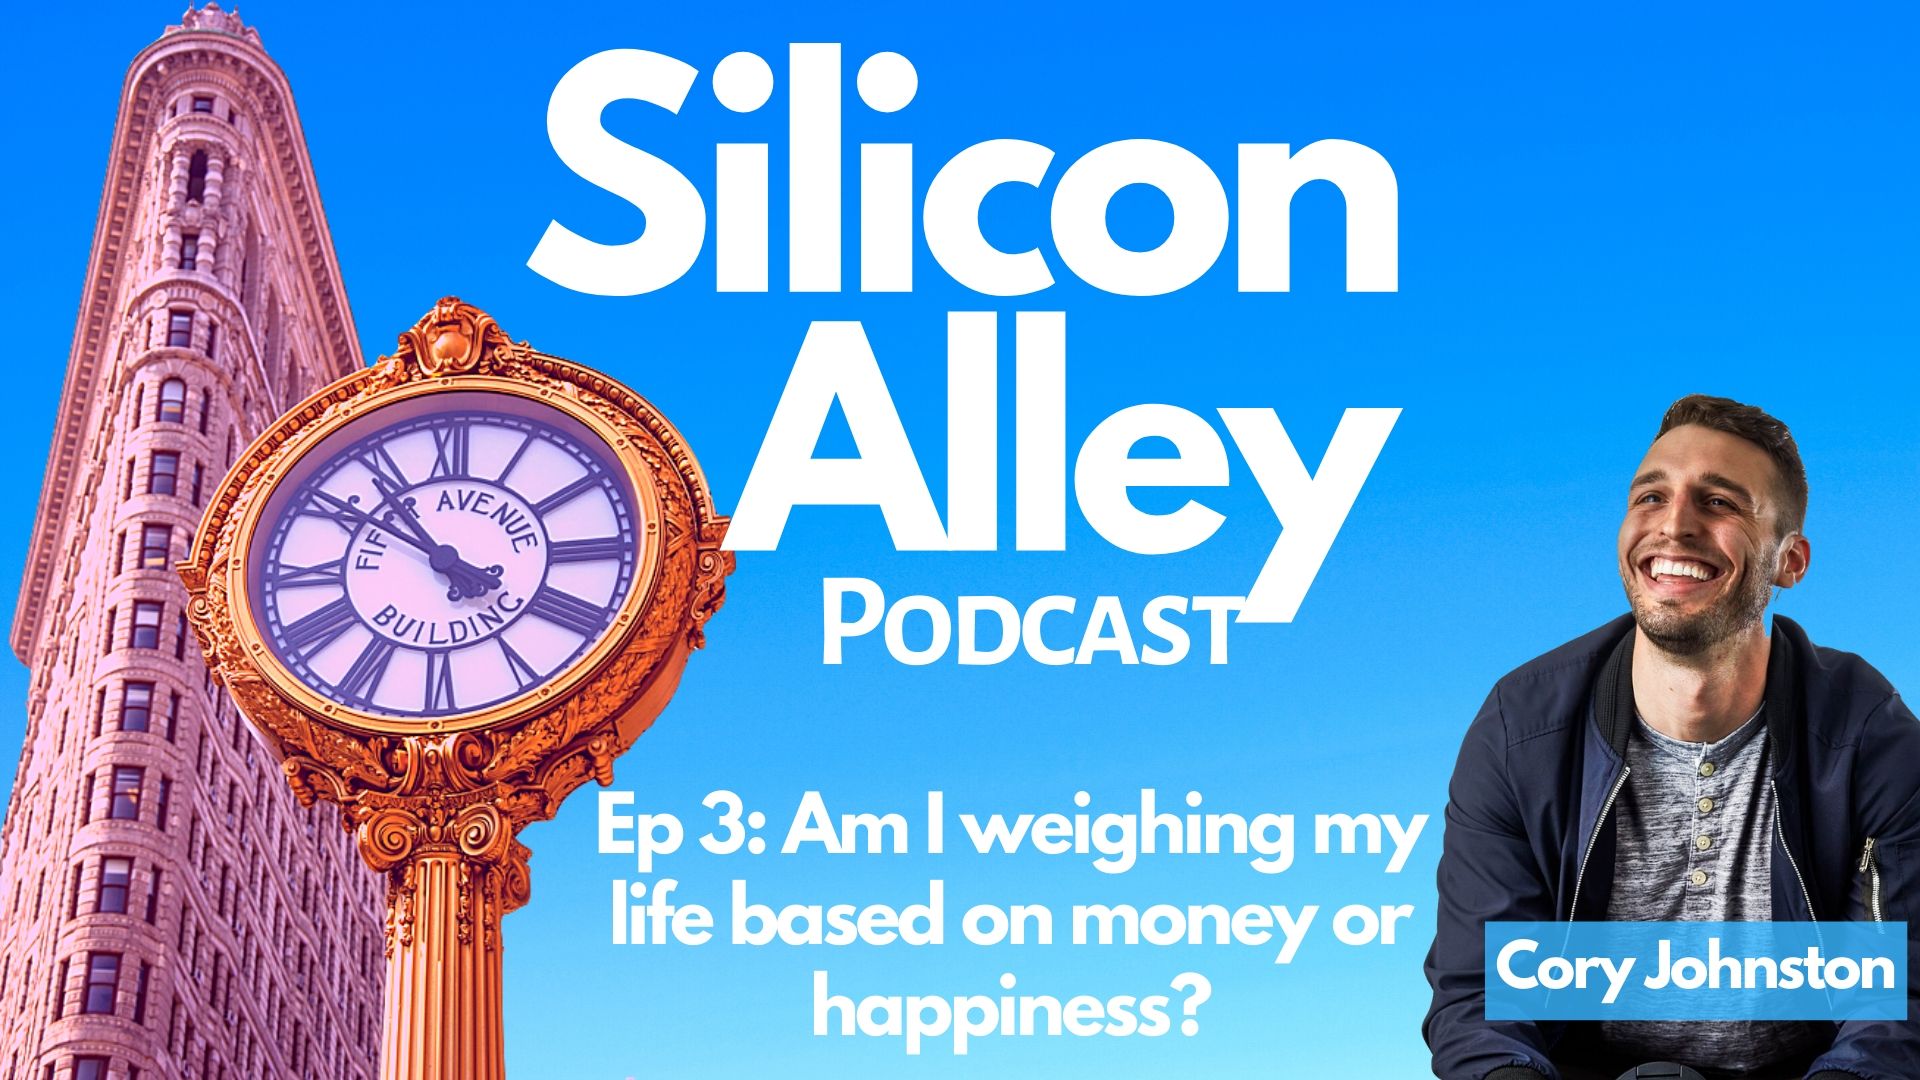 Am I weighing my life based on money or happiness? With Cory Johnston Founder of Brighteous Media Silicon Alley Podcast Cover Art